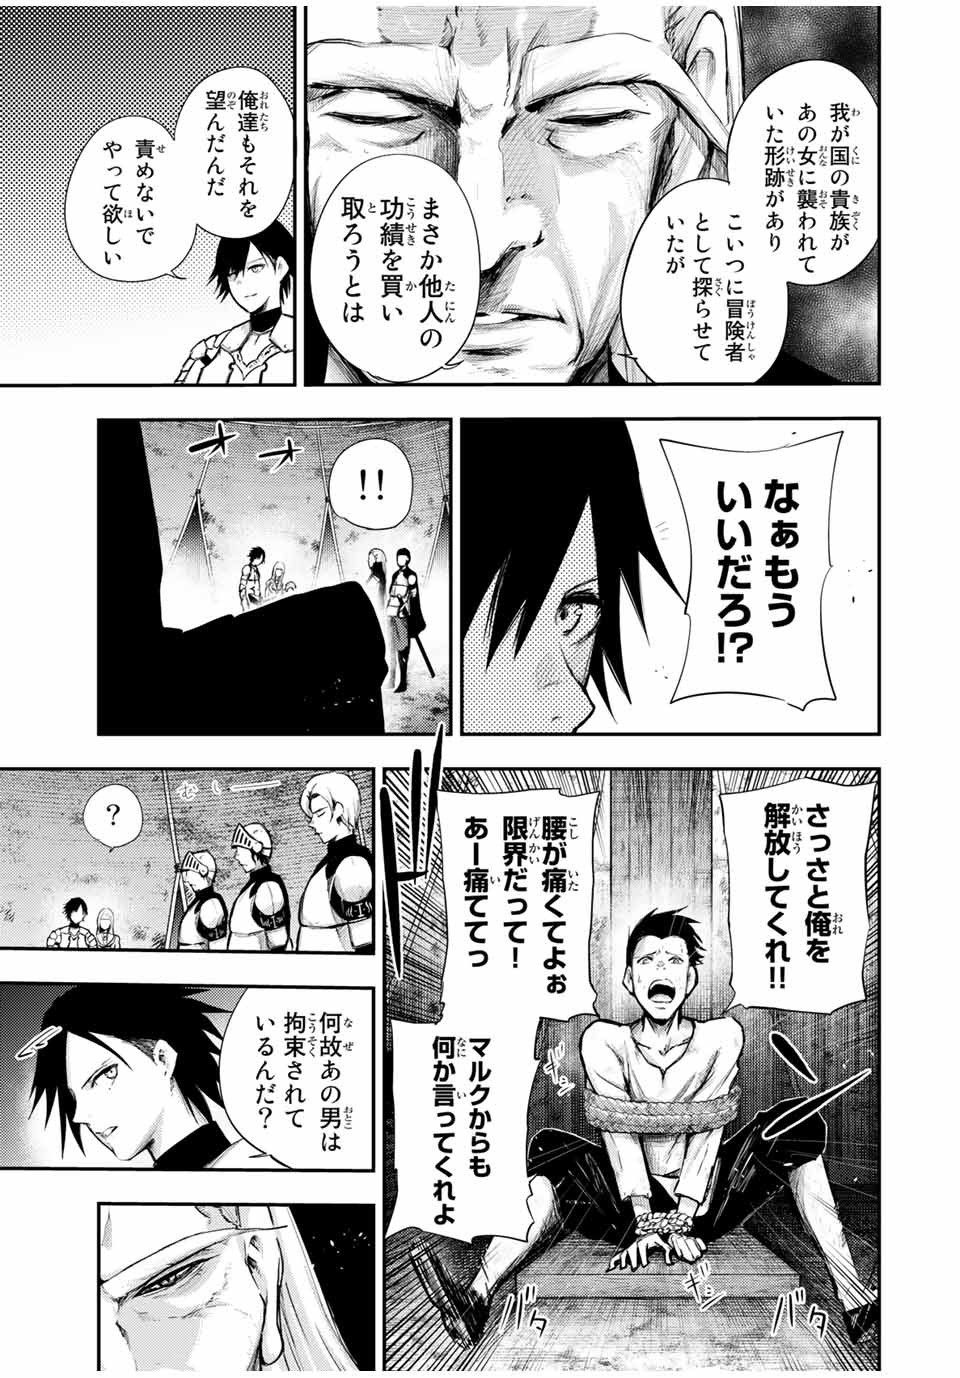 the strongest former prince-; 奴隷転生 ～その奴隷、最強の元王子につき～ 第27話 - Page 19